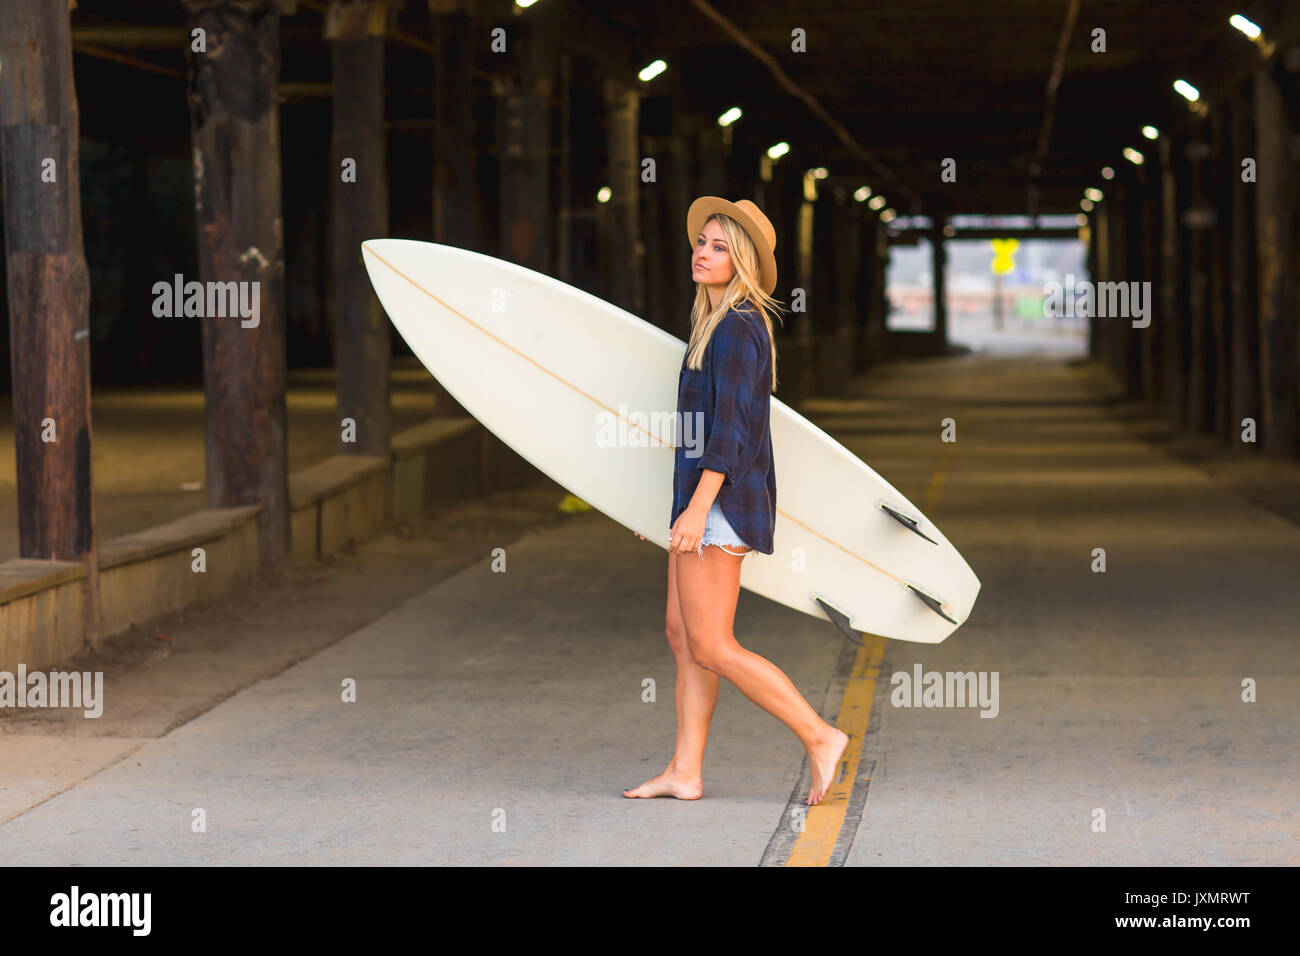 Young female surfer carrying surfboard in underpass, Santa Monica, California, USA Stock Photo